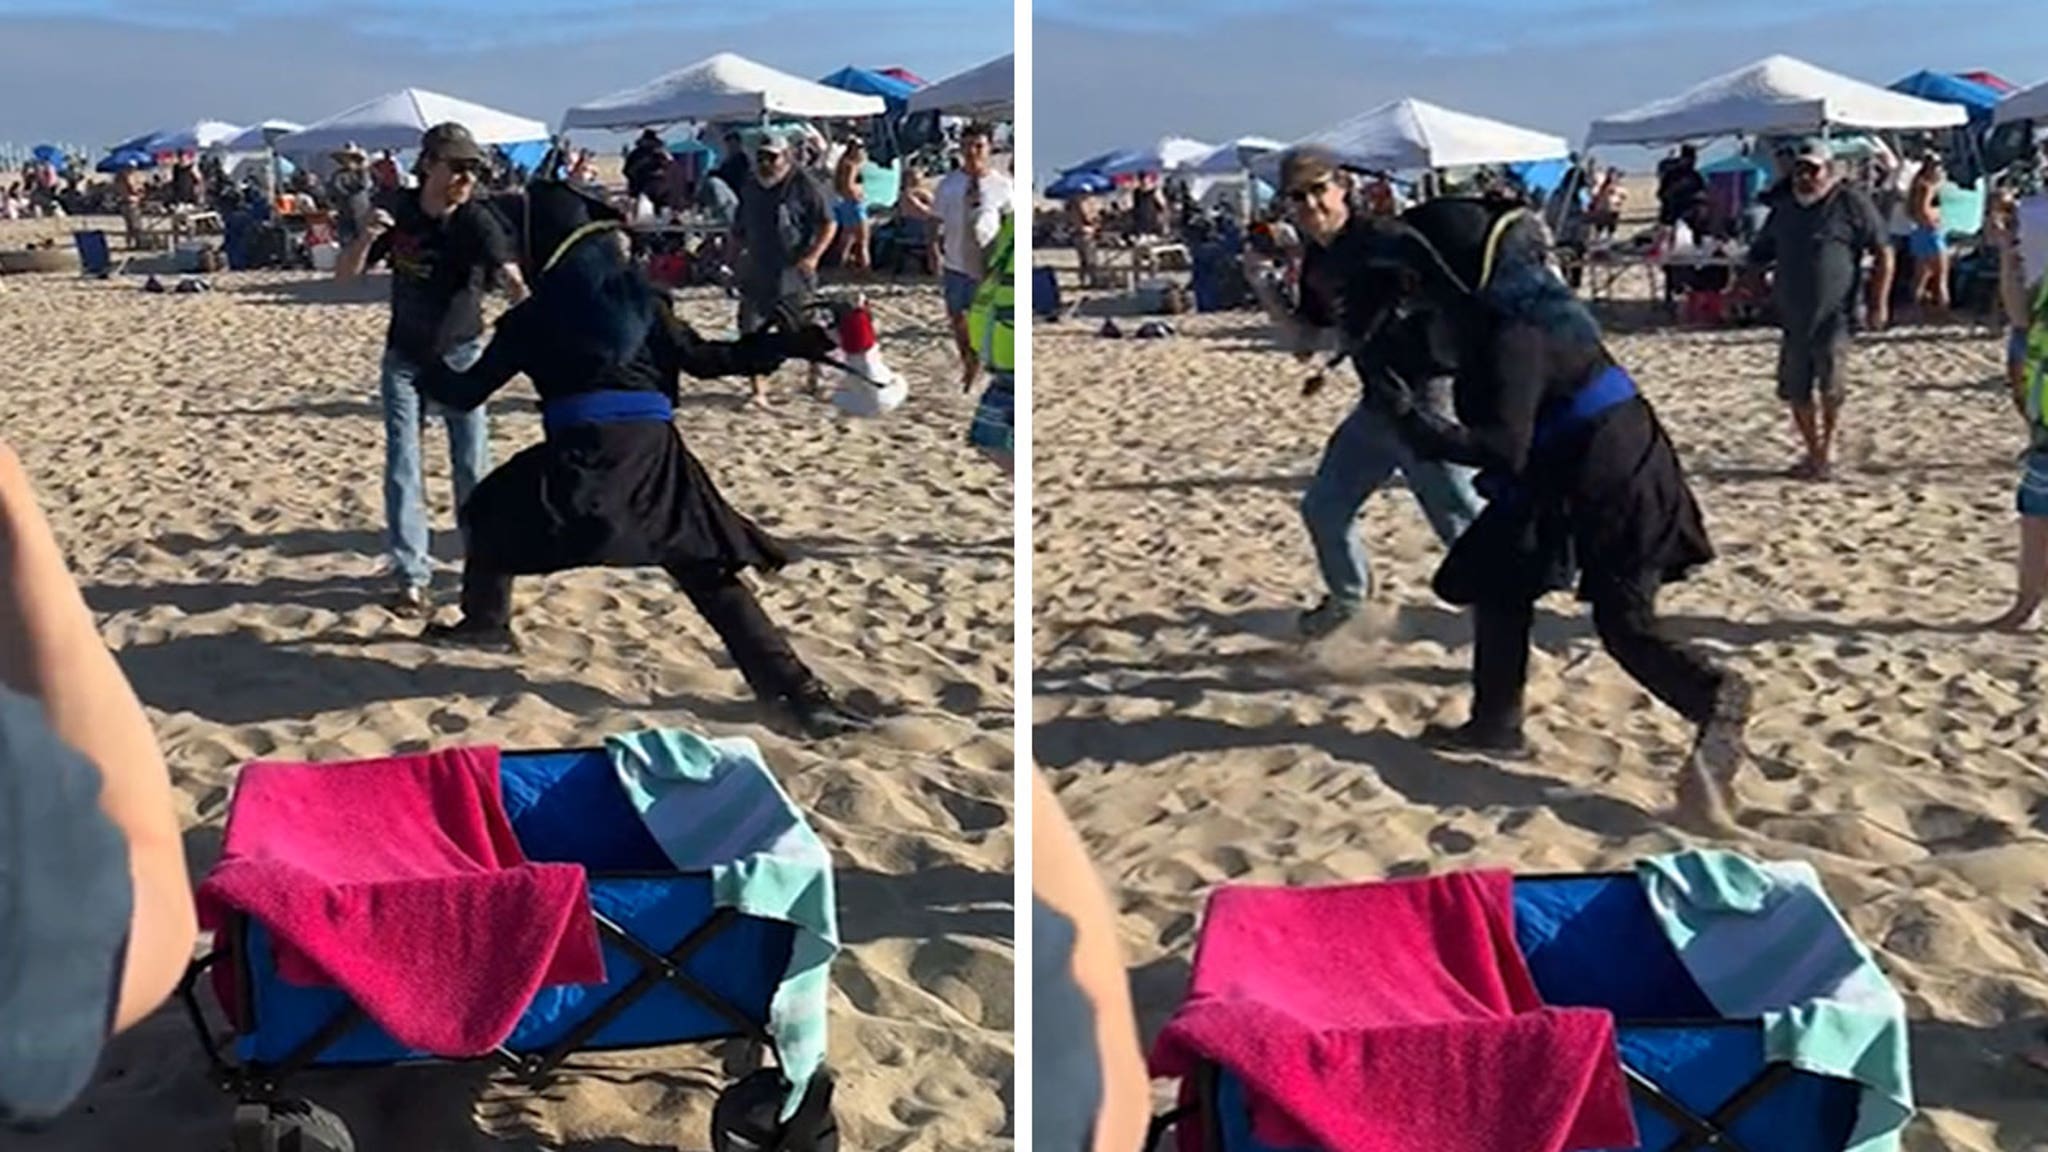 Man Attacked By Furry At Huntington Beach Meetup, Wild Video Shows